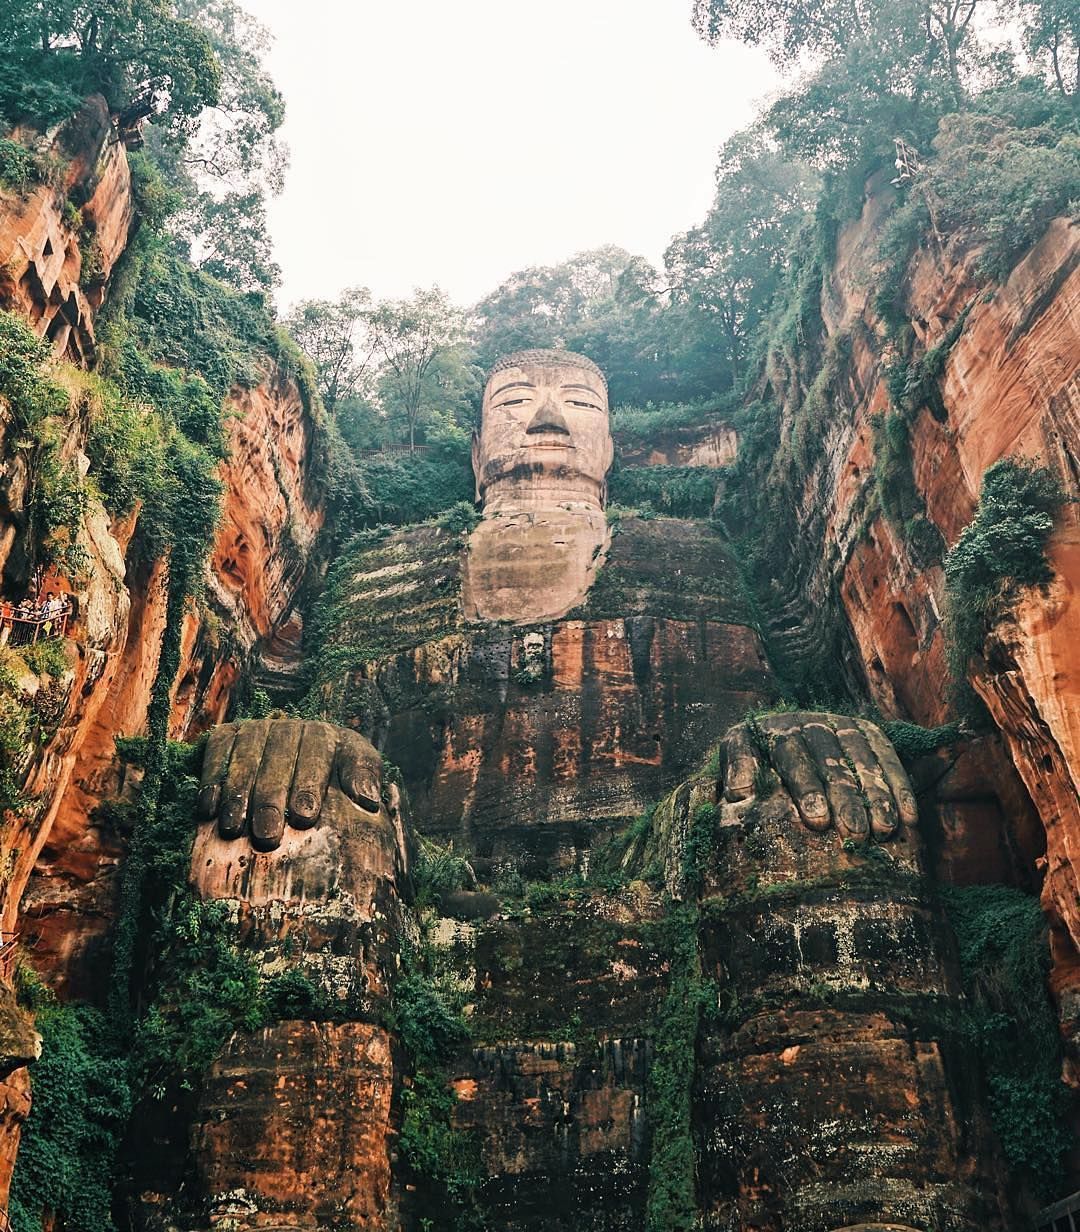 The Leshan Giant Buddha is a 71metre (233ft) tall statue, the biggest Buddha in th